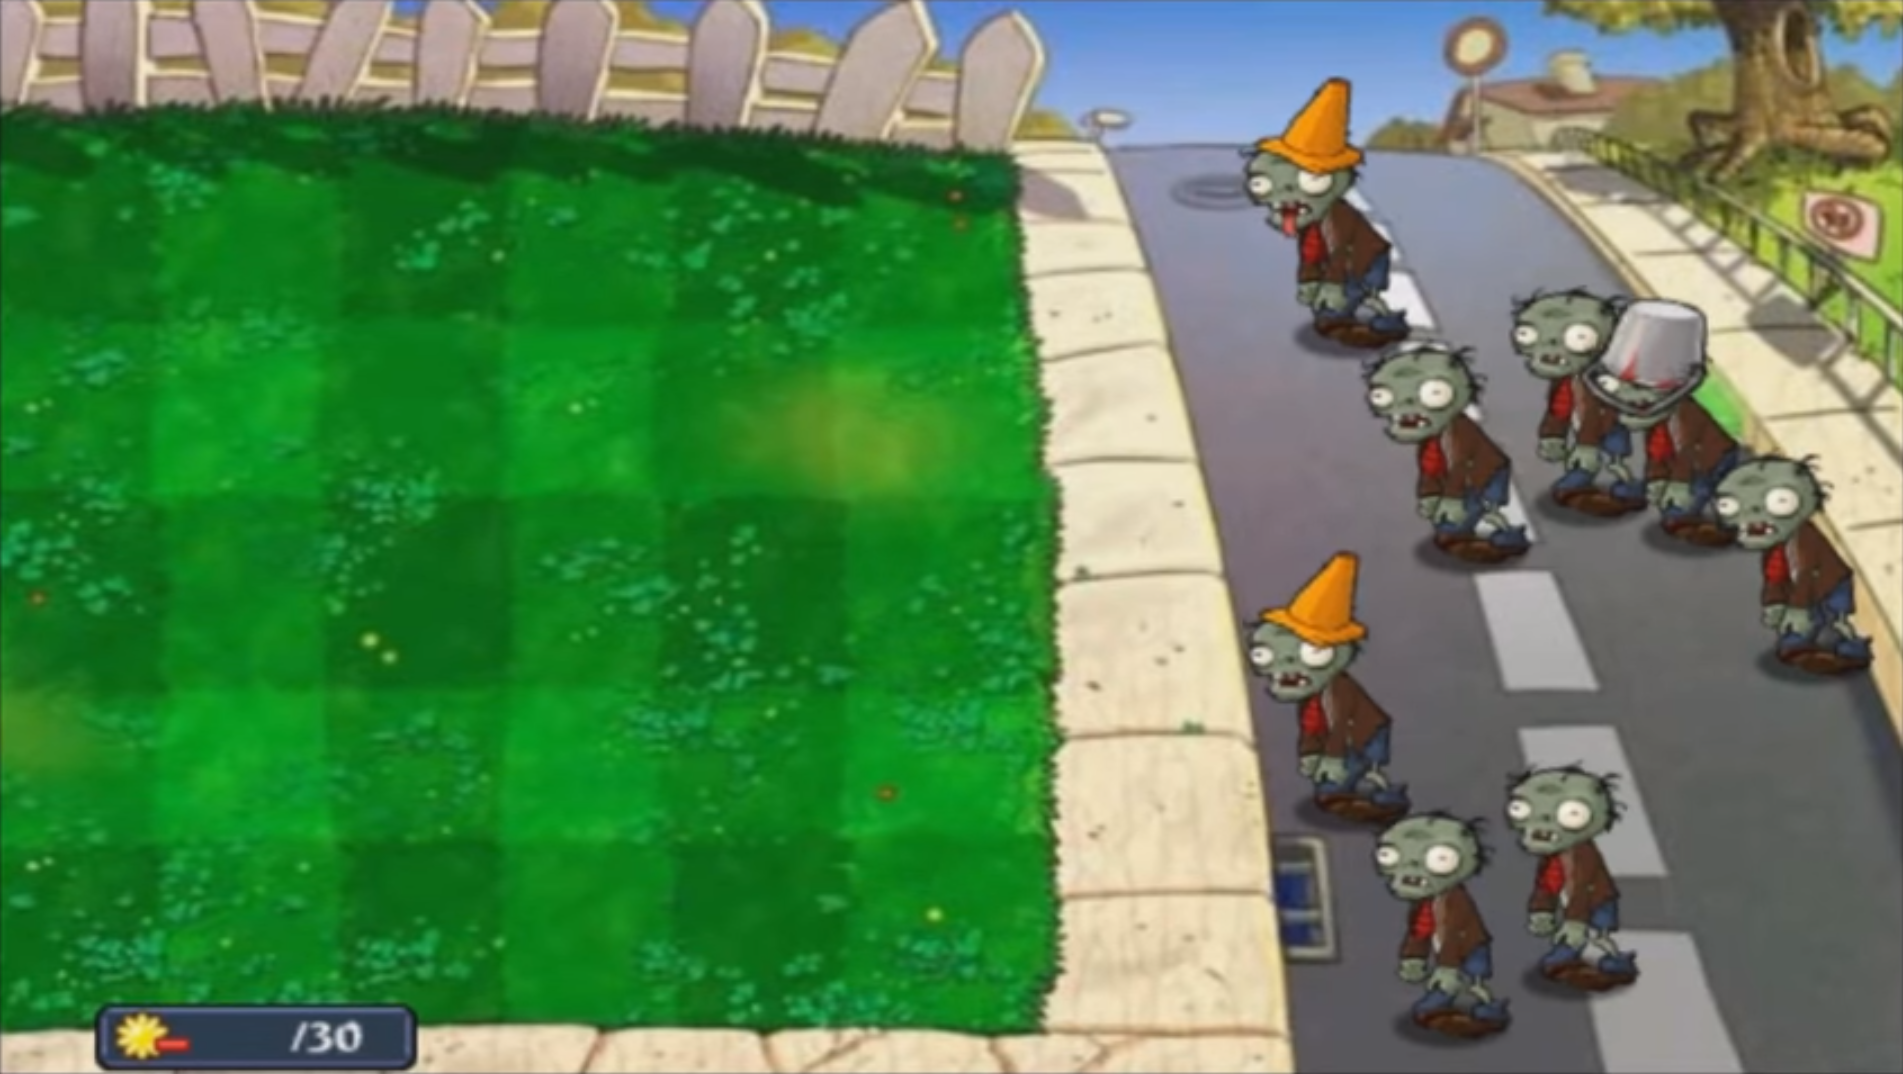 Plants vs. Zombies (video game) - Wikipedia